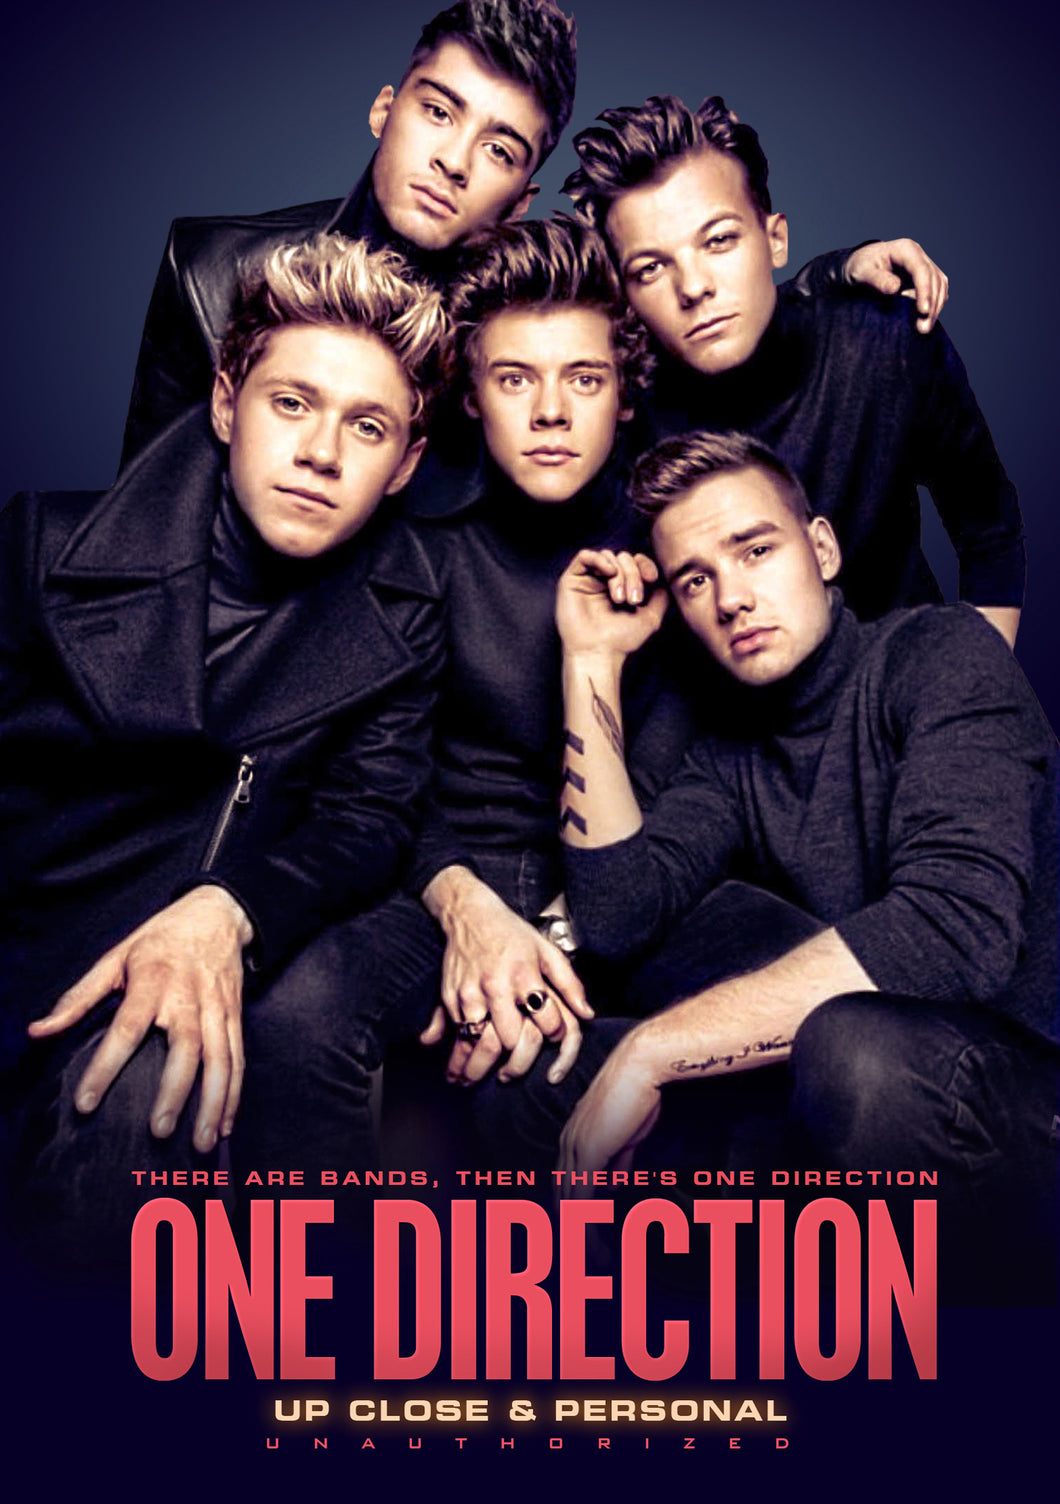 One Direction - Up Close & Personal (DVD)